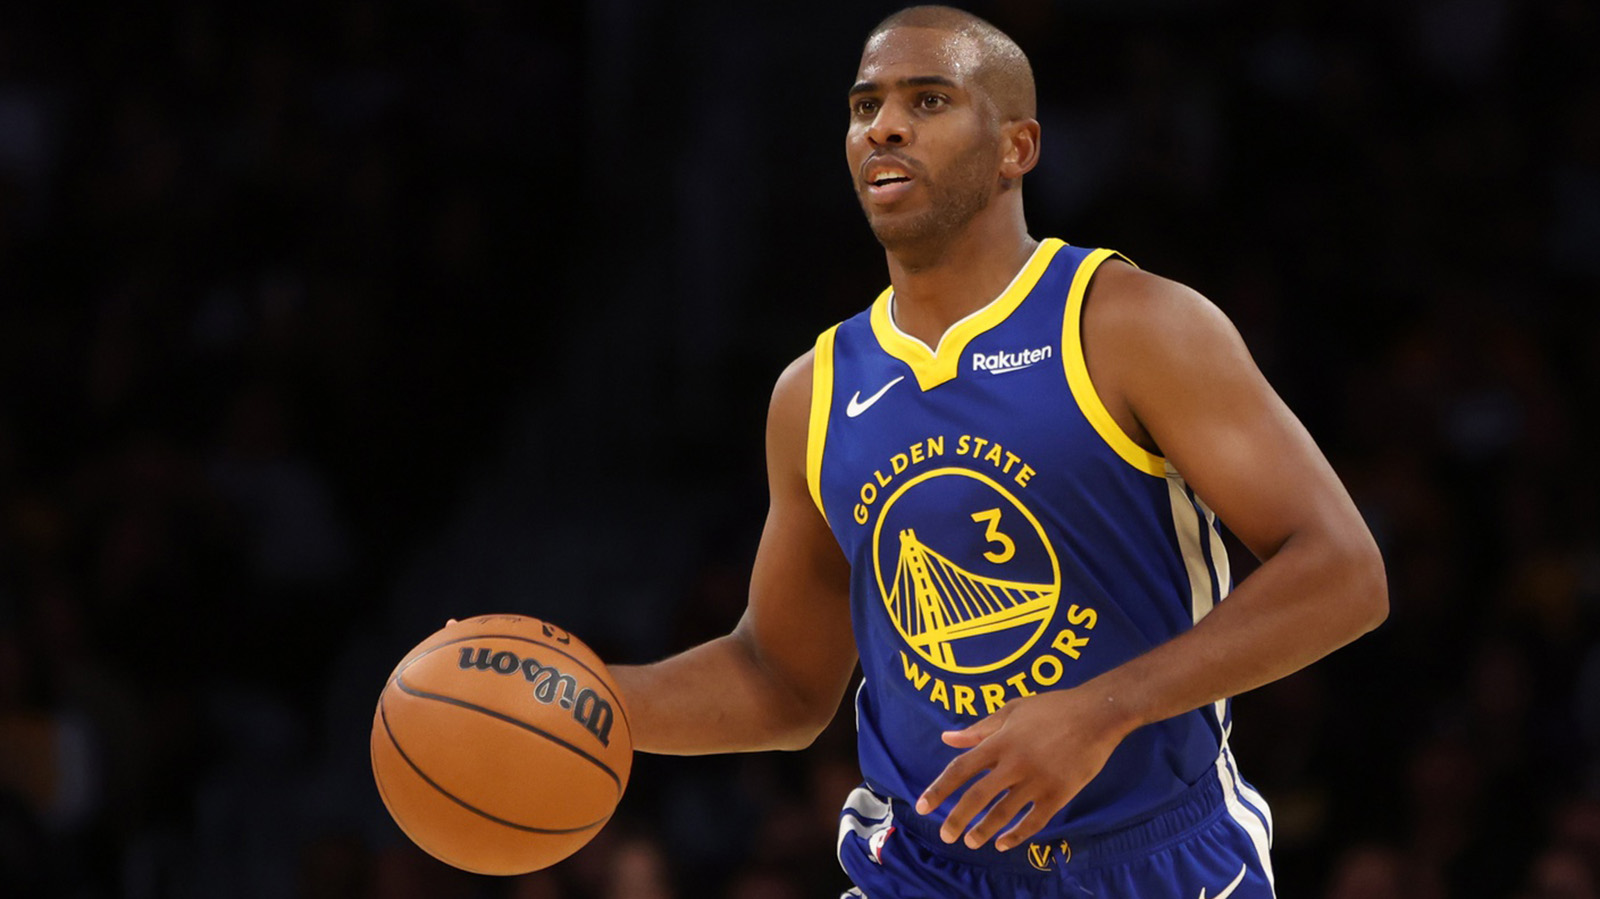 NBA Star Chris Paul Talks the 'Emotional' Bond He Shares with His Dad